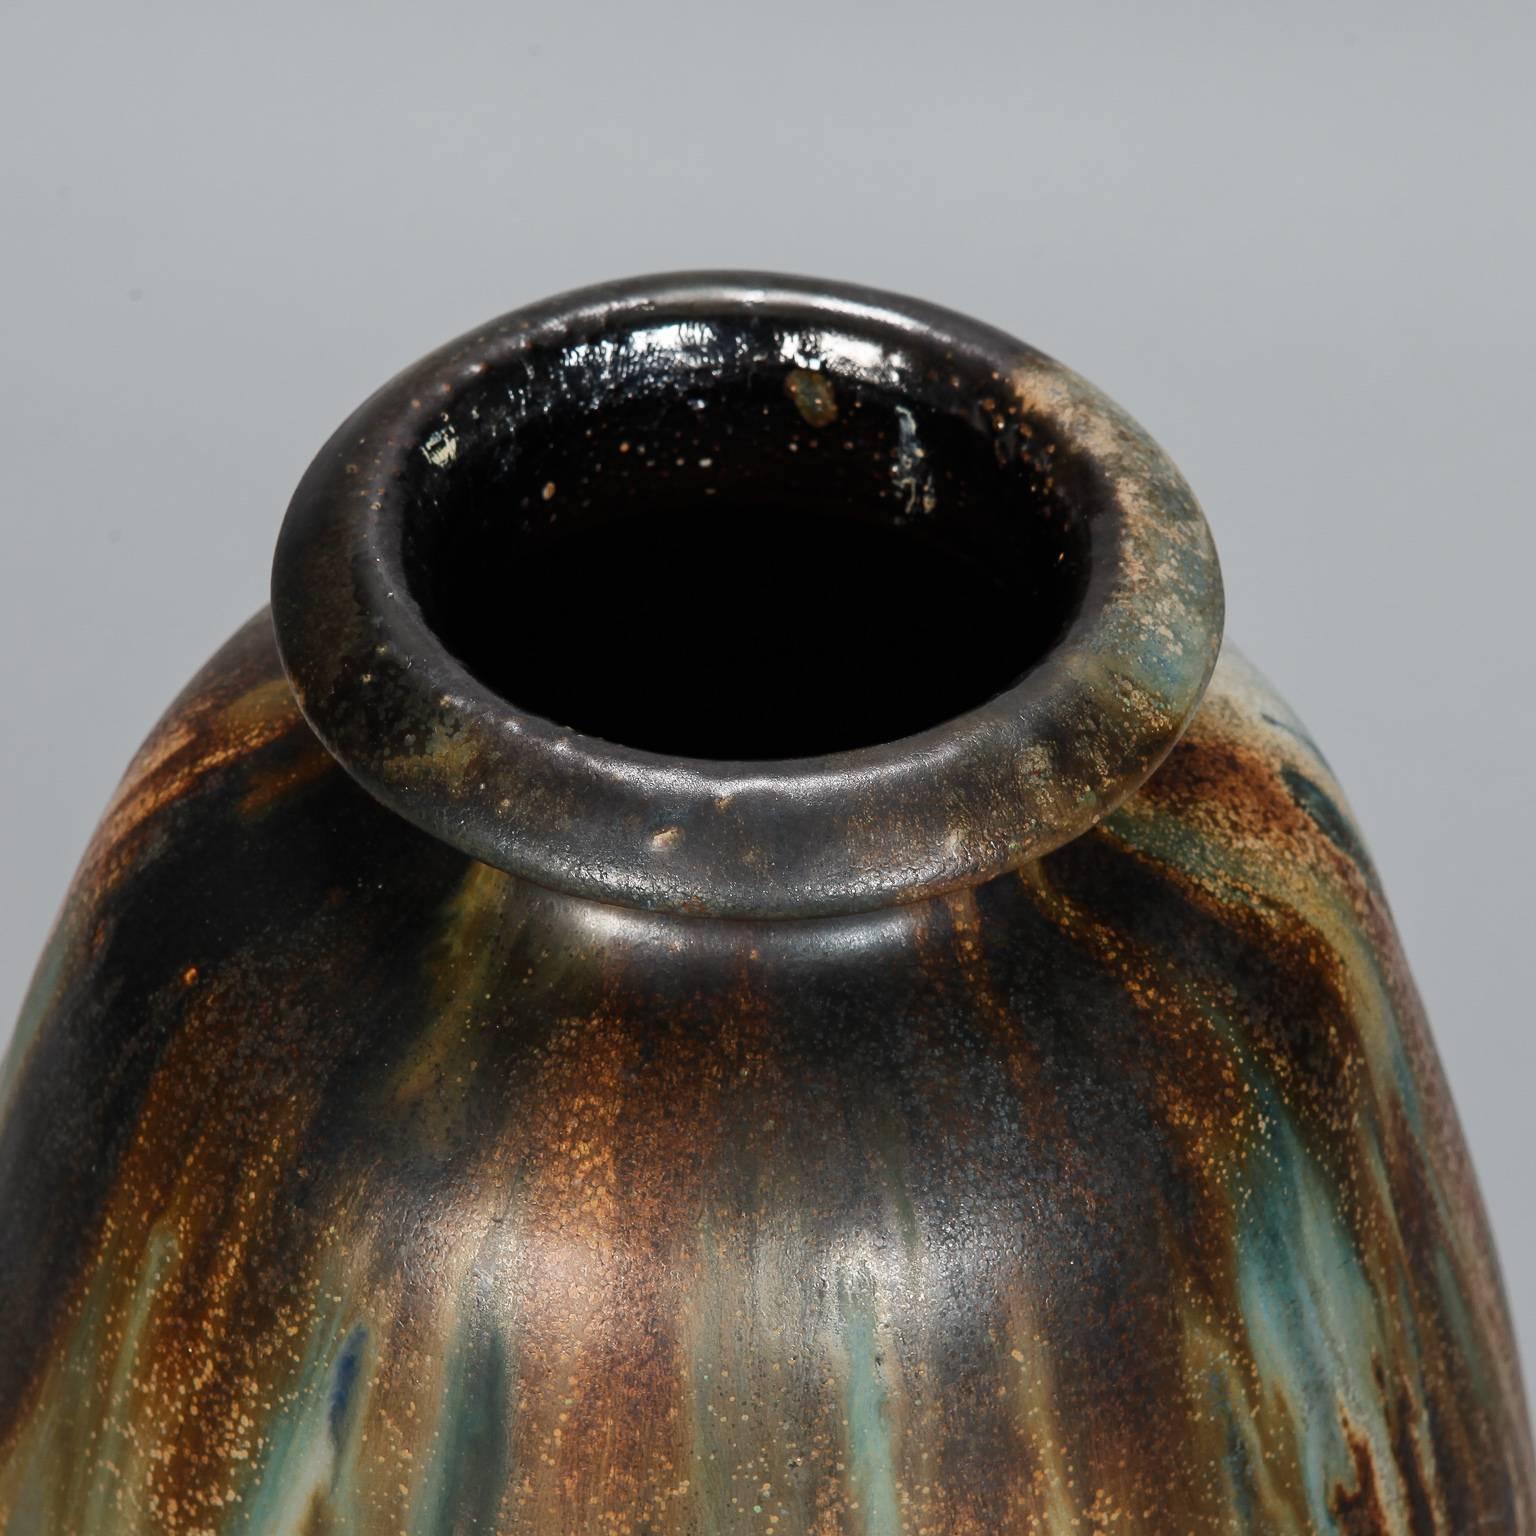 Circa 1930s tall vase signed by famed Belgian ceramic artist Roger Guerin is just under 2 feet tall. Classic shape with narrow neck and rim in distinctive, streaky glaze with gold, blue, rust and earth tones. Artist signature incised on bottom.